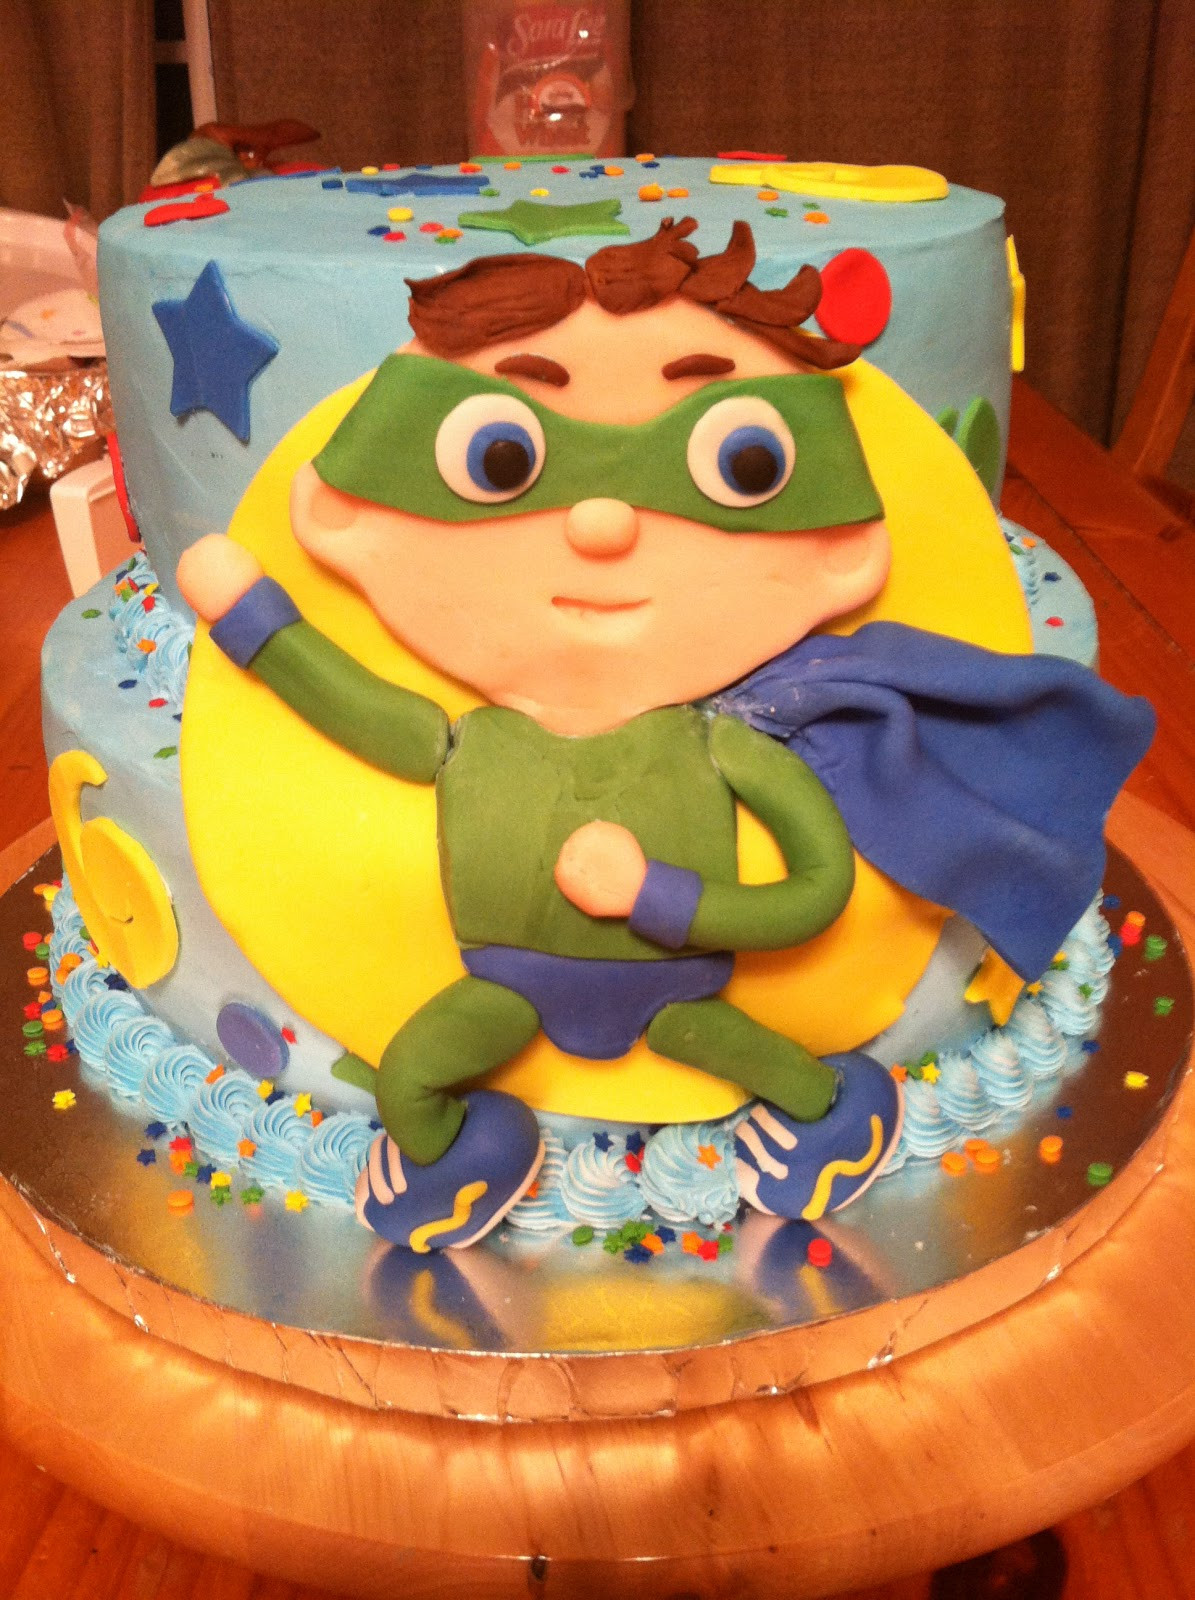 Super Why Birthday Cake
 Introducing Super Why Cake for Cole s 1st birthday